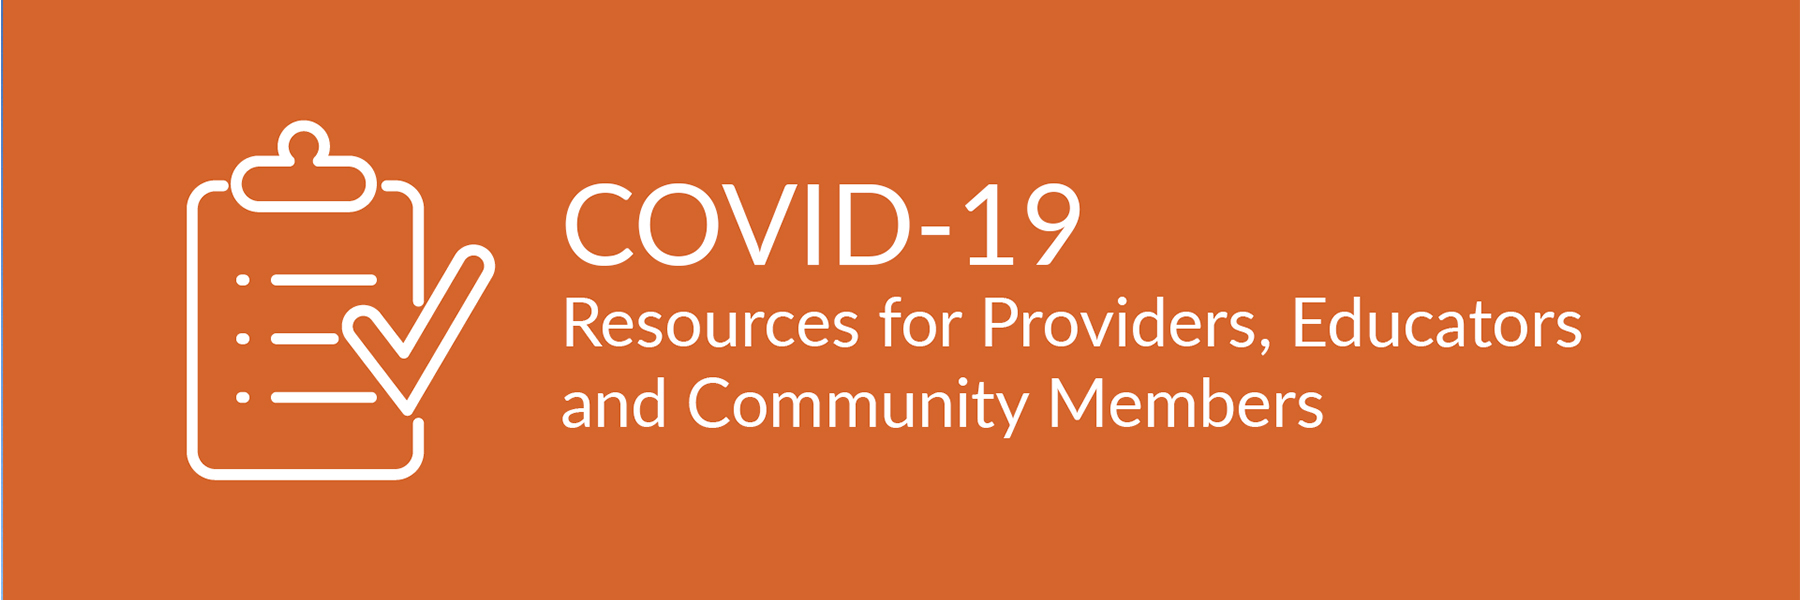 COVID-19 Resources for Providers, Educators and Community Members